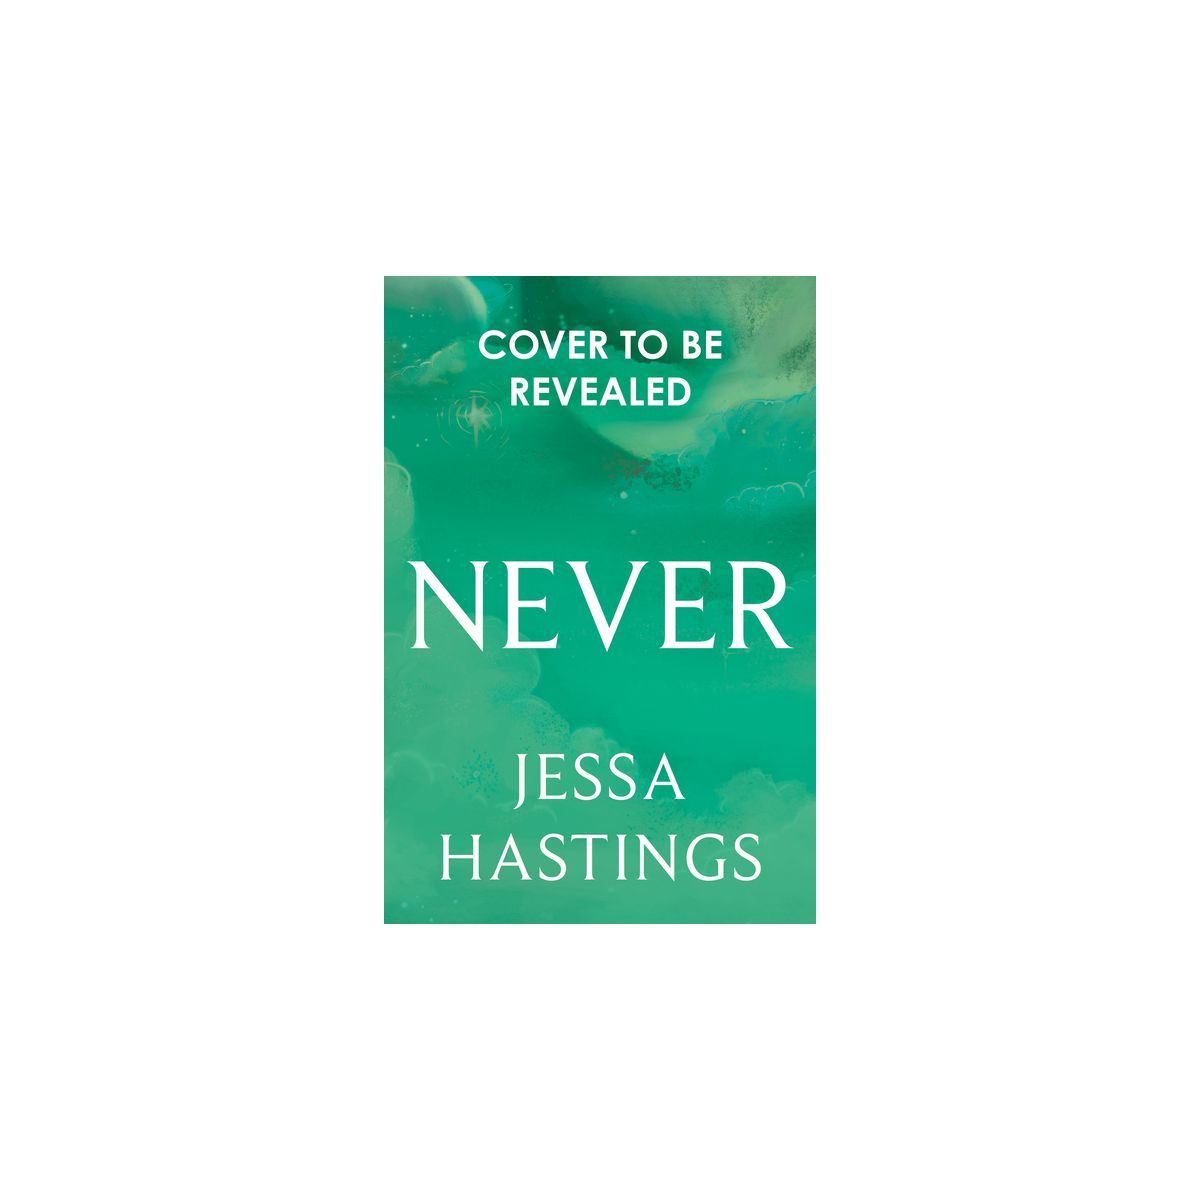 Never - by Jessa Hastings | Target